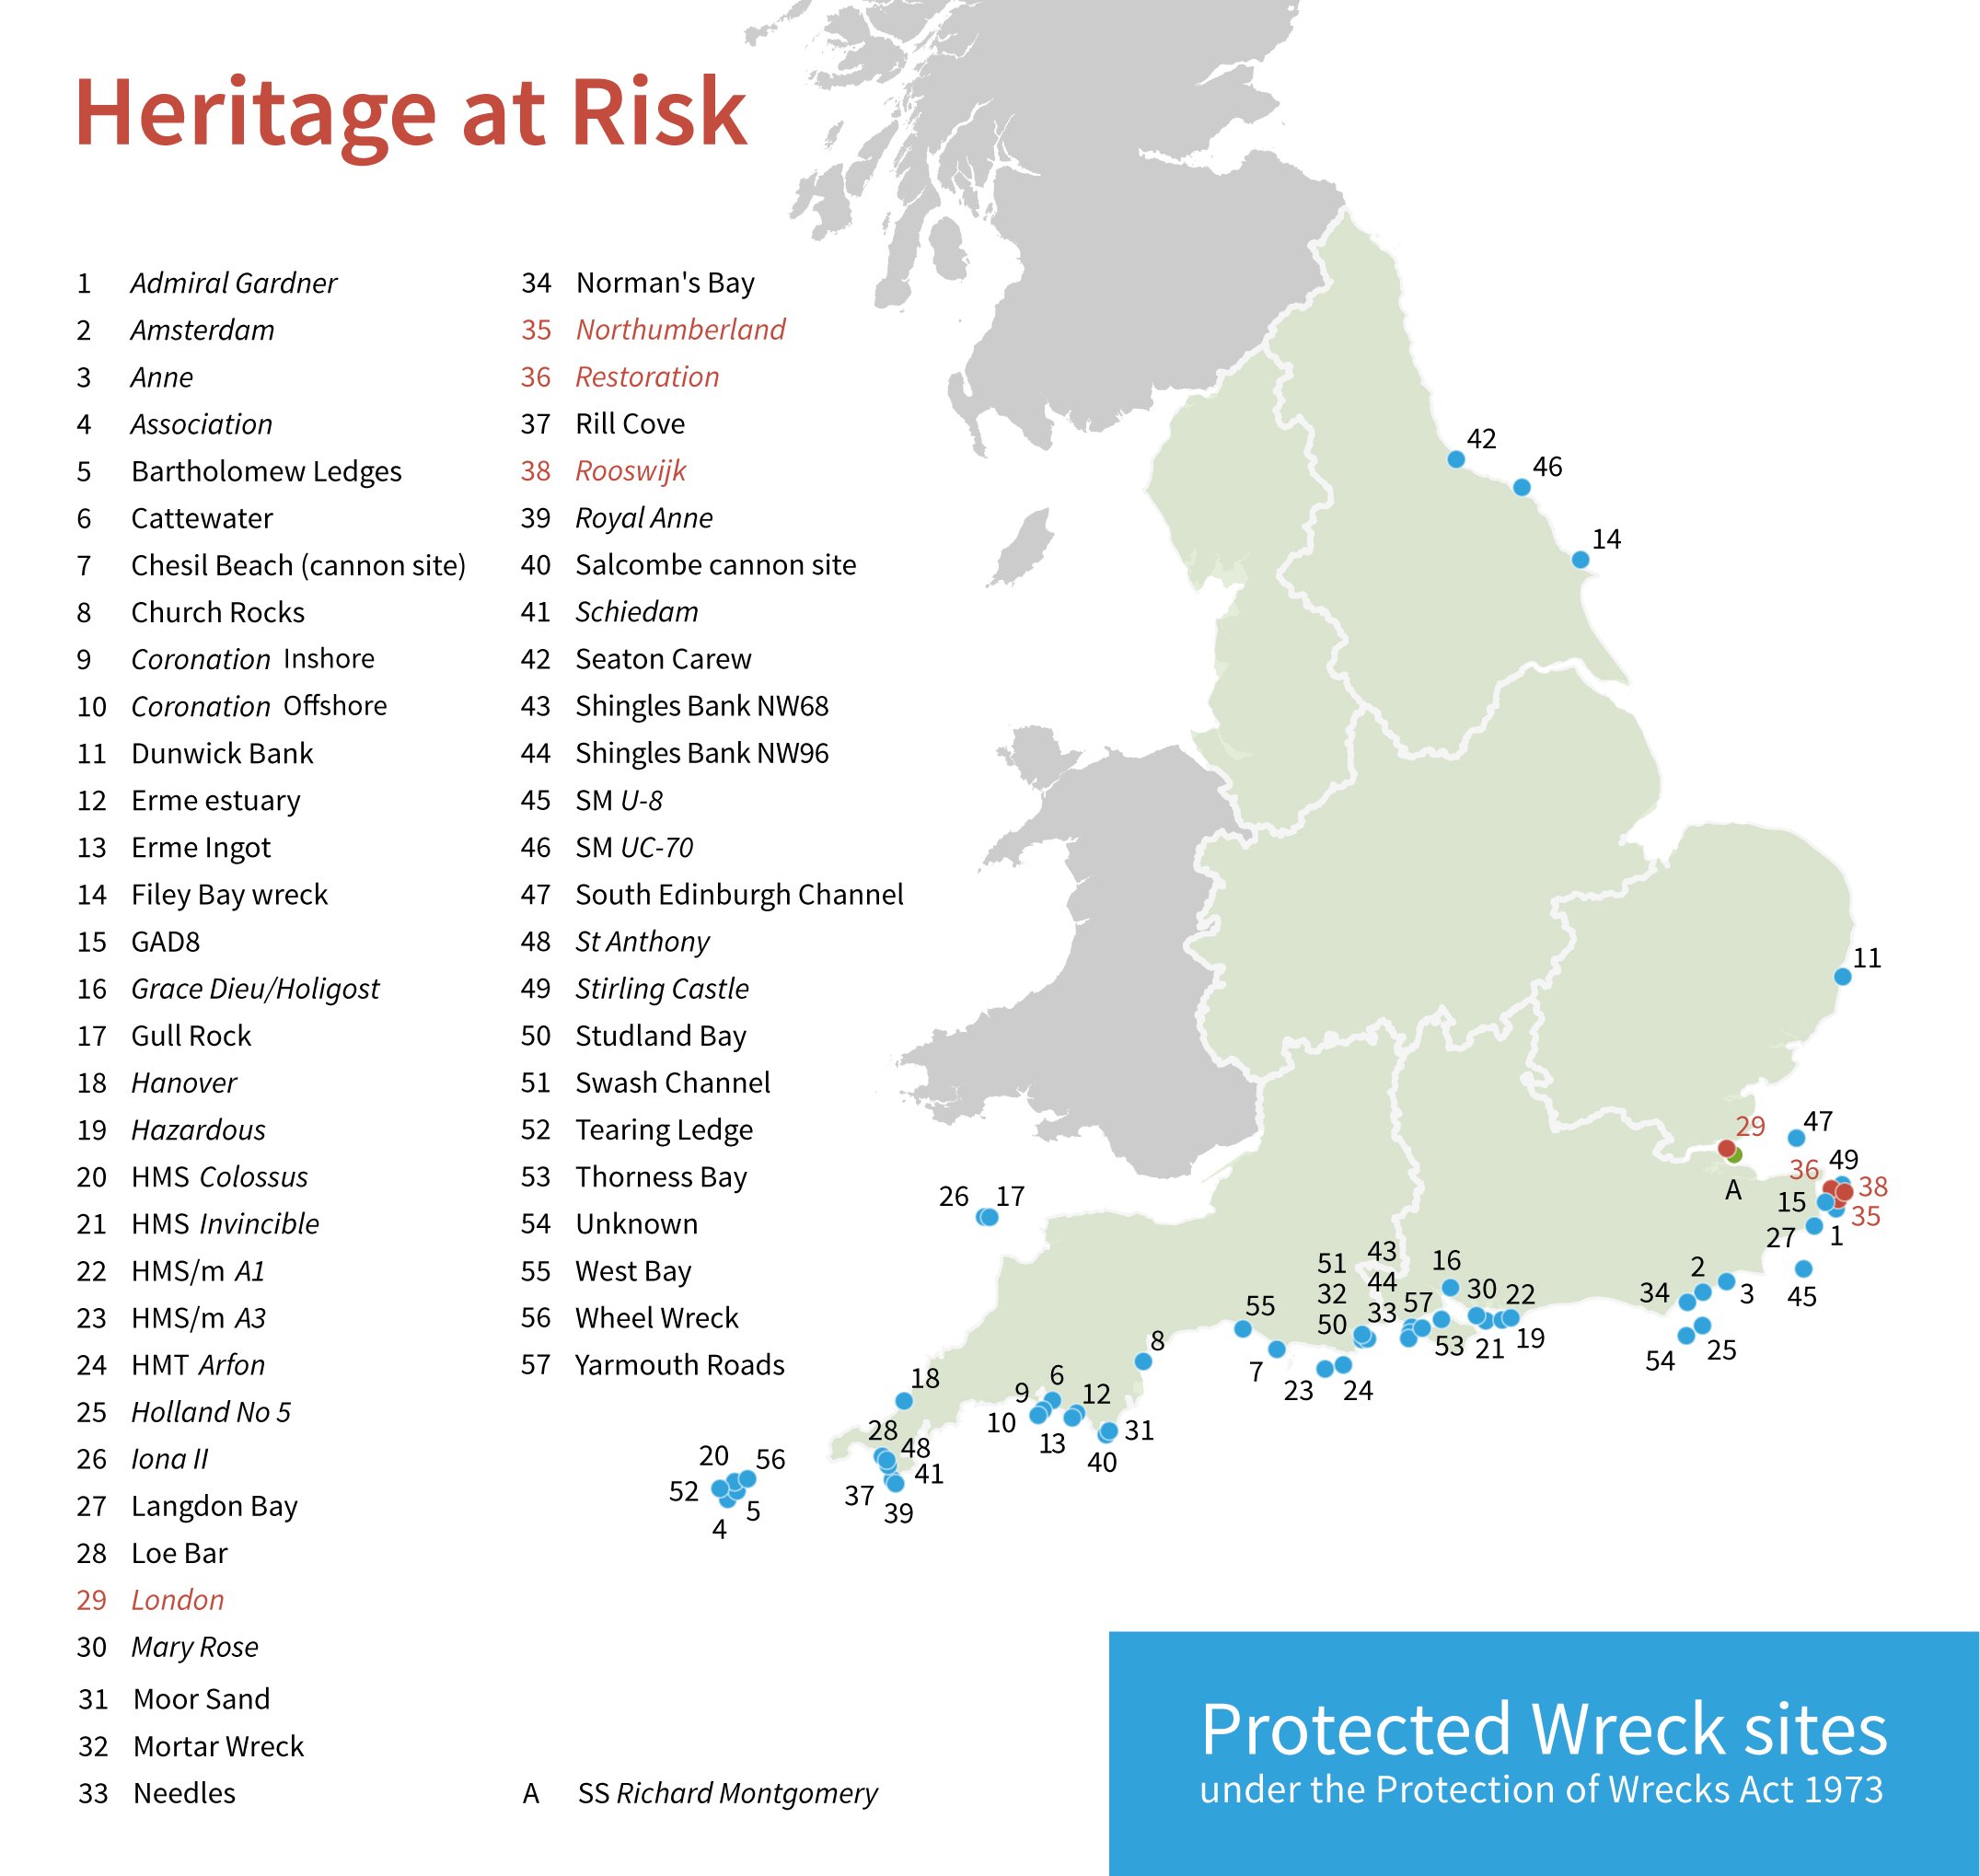 A map showing 57 protected and designated wreck sites, primarily along England's South and East Coasts. Four of the wrecks; the London, the Northumberland, the Restoration, and the Rooswijk are highlighted in red, as sites 'at risk'. These are all in the Thames Estuary, and the Dover Straight.